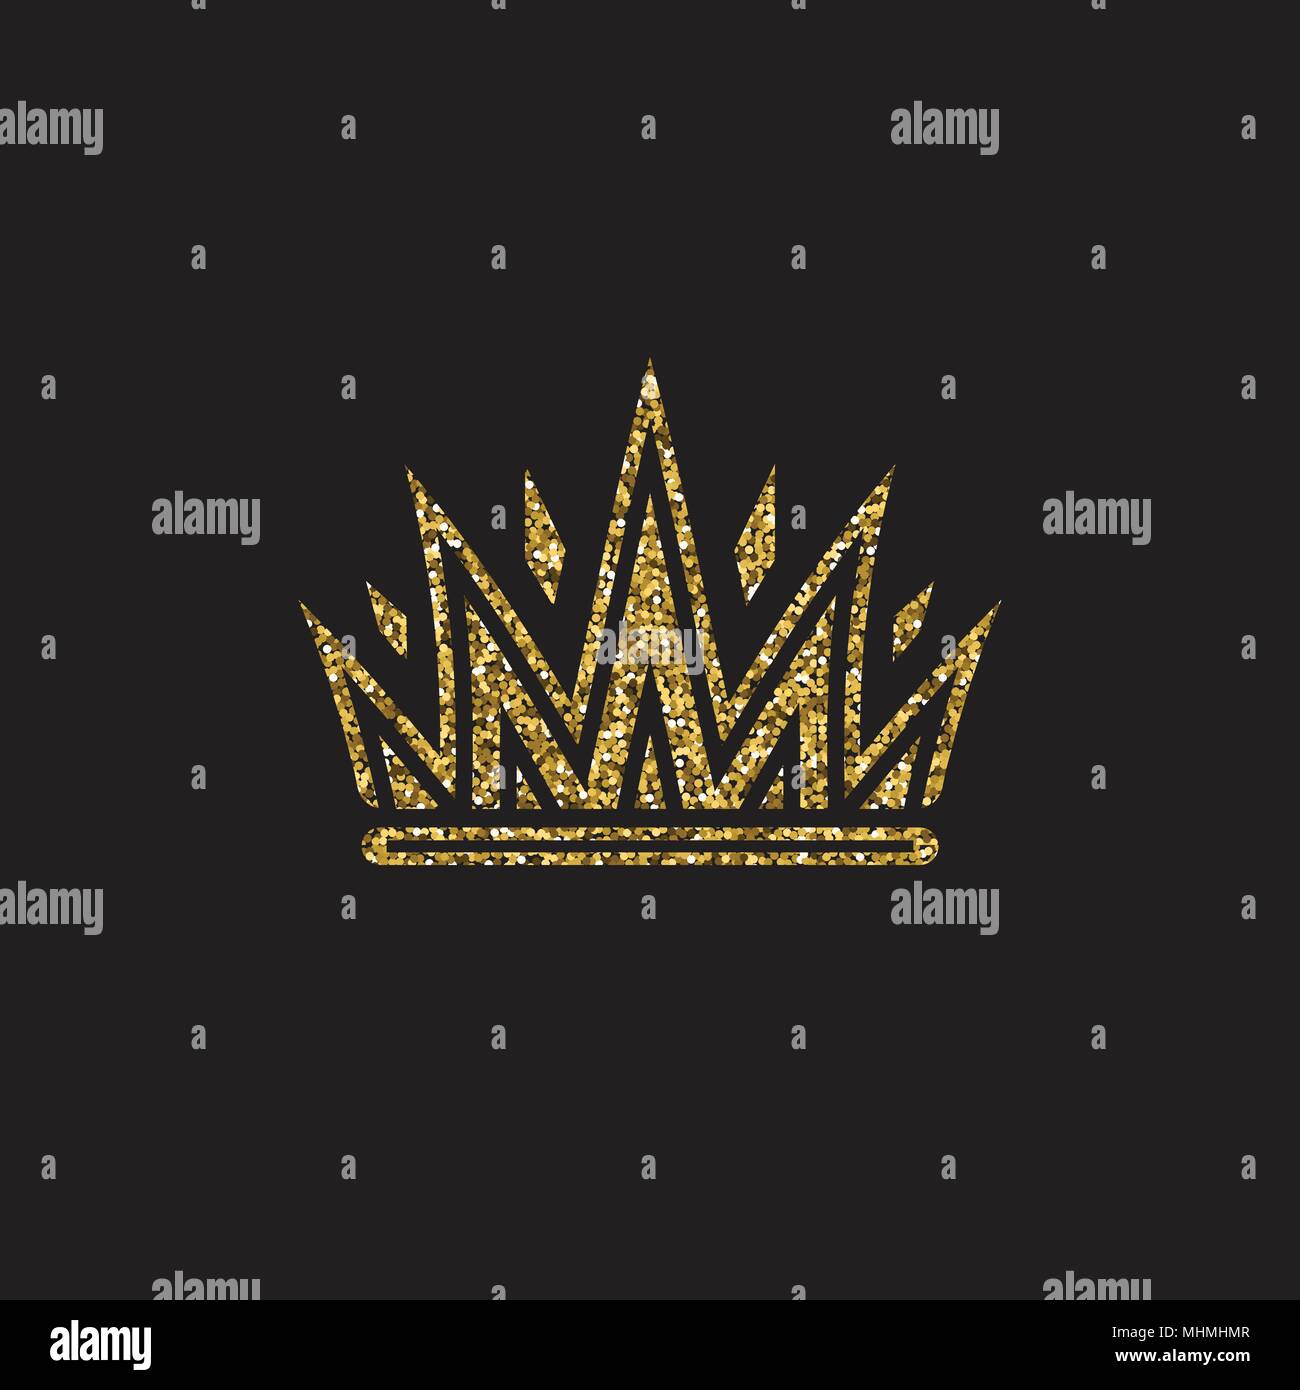 Queen crown, royal gold headdress. King golden accessory. Isolated vector illustrations. Elite class symbol on black background. Stock Vector